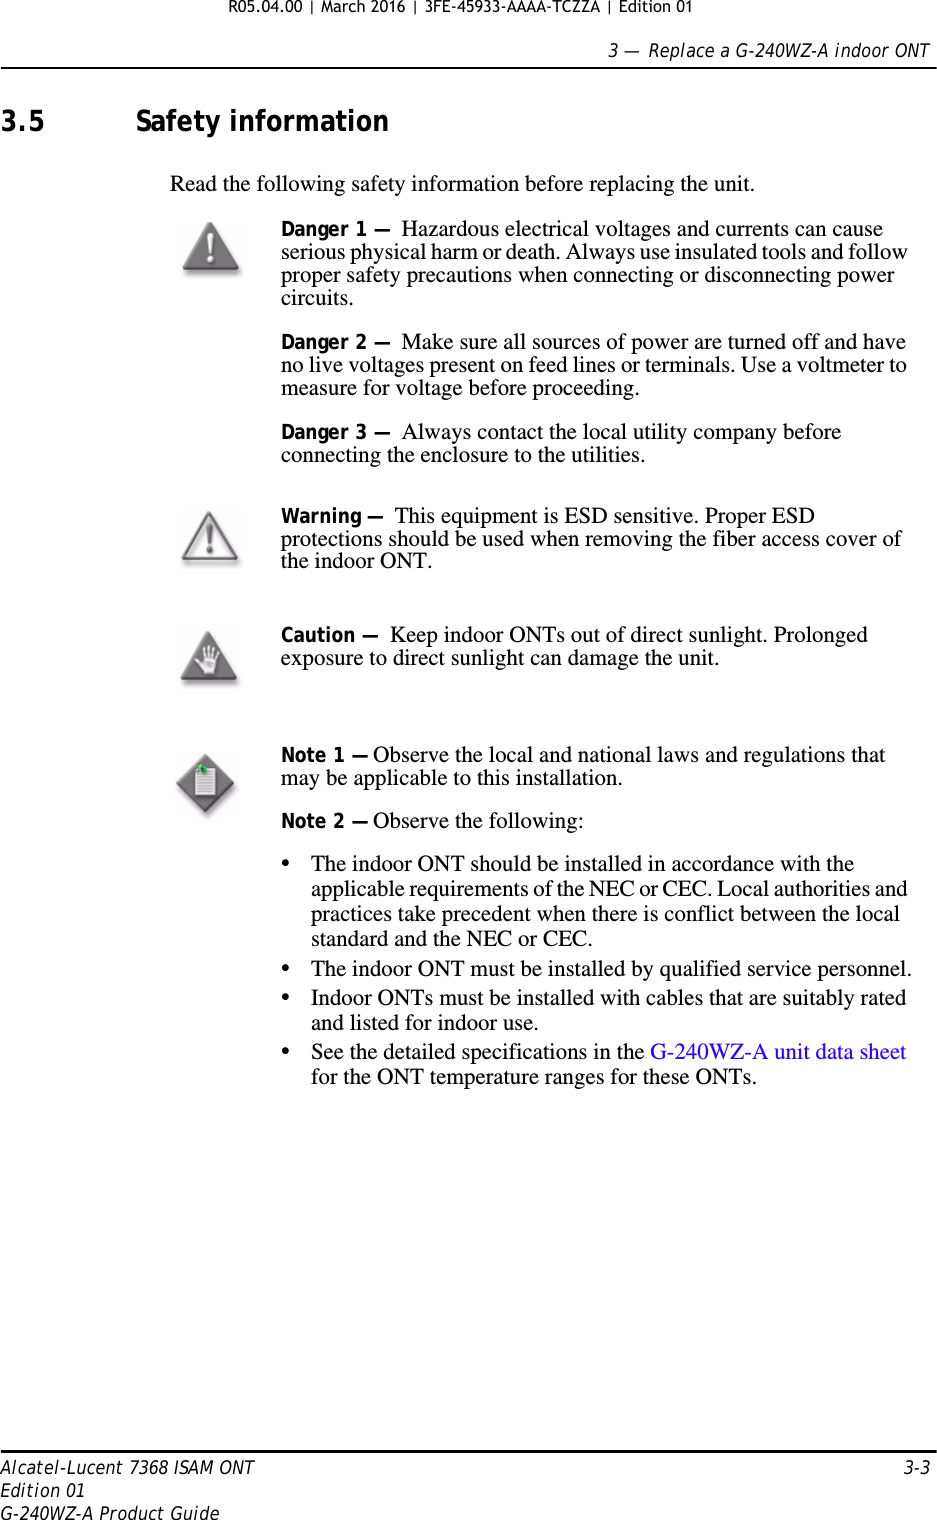 3 —  Replace a G-240WZ-A indoor ONTAlcatel-Lucent 7368 ISAM ONT 3-3Edition 01G-240WZ-A Product Guide3.5 Safety informationRead the following safety information before replacing the unit. Danger 1 —  Hazardous electrical voltages and currents can cause serious physical harm or death. Always use insulated tools and follow proper safety precautions when connecting or disconnecting power circuits. Danger 2 —  Make sure all sources of power are turned off and have no live voltages present on feed lines or terminals. Use a voltmeter to measure for voltage before proceeding.Danger 3 —  Always contact the local utility company before connecting the enclosure to the utilities.Warning —  This equipment is ESD sensitive. Proper ESD protections should be used when removing the fiber access cover of the indoor ONT.Caution —  Keep indoor ONTs out of direct sunlight. Prolonged exposure to direct sunlight can damage the unit.Note 1 — Observe the local and national laws and regulations that may be applicable to this installation.Note 2 — Observe the following:•The indoor ONT should be installed in accordance with the applicable requirements of the NEC or CEC. Local authorities and practices take precedent when there is conflict between the local standard and the NEC or CEC. •The indoor ONT must be installed by qualified service personnel.•Indoor ONTs must be installed with cables that are suitably rated and listed for indoor use.•See the detailed specifications in the G-240WZ-A unit data sheet for the ONT temperature ranges for these ONTs. R05.04.00 | March 2016 | 3FE-45933-AAAA-TCZZA | Edition 01 